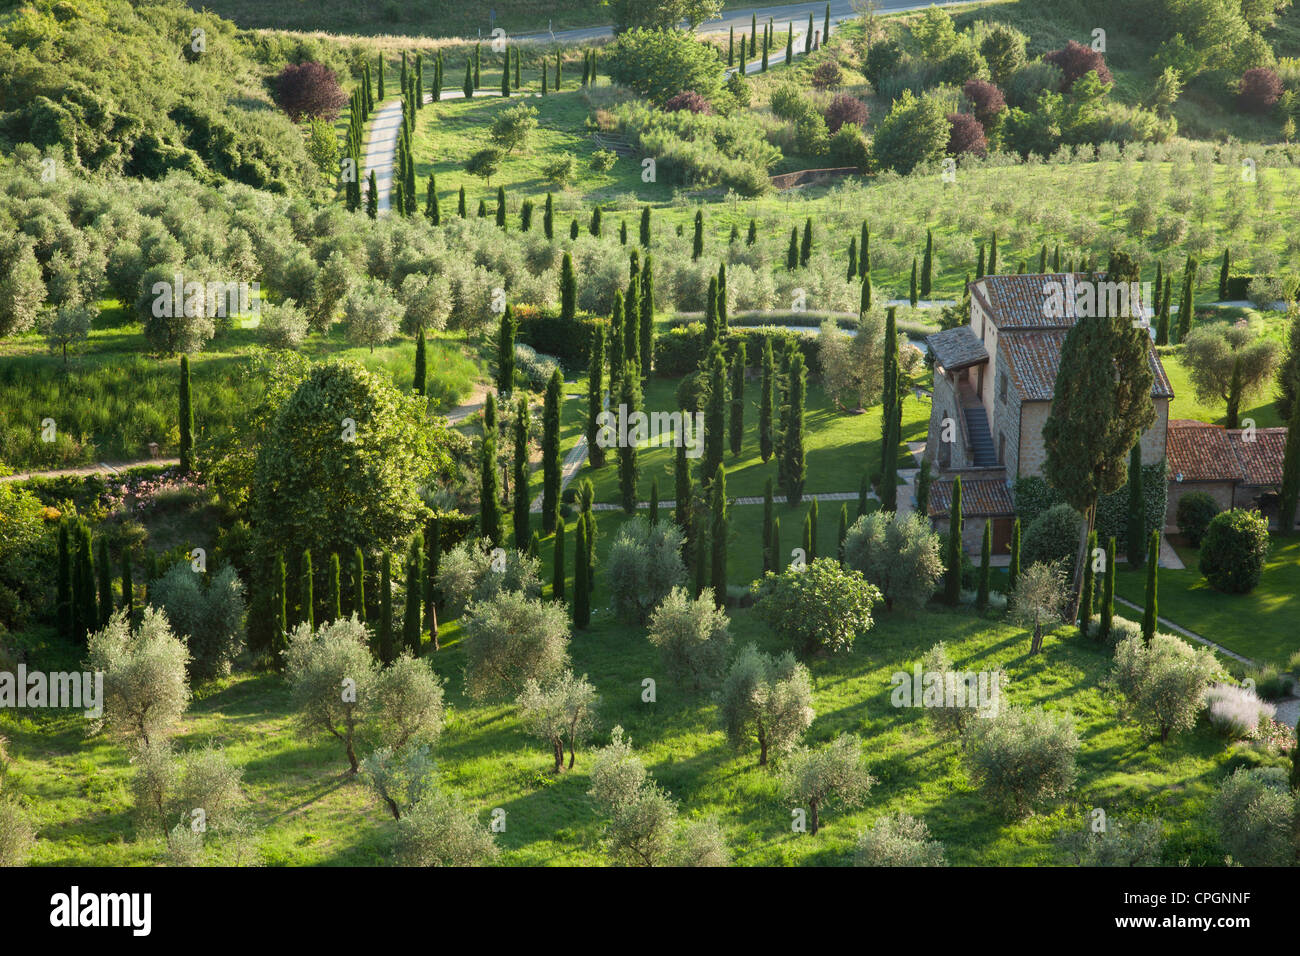 Olive groves and Italian Cyprus trees are seen at sunset in the Medieval Umbrian town of Orvieto. Italy. Stock Photo